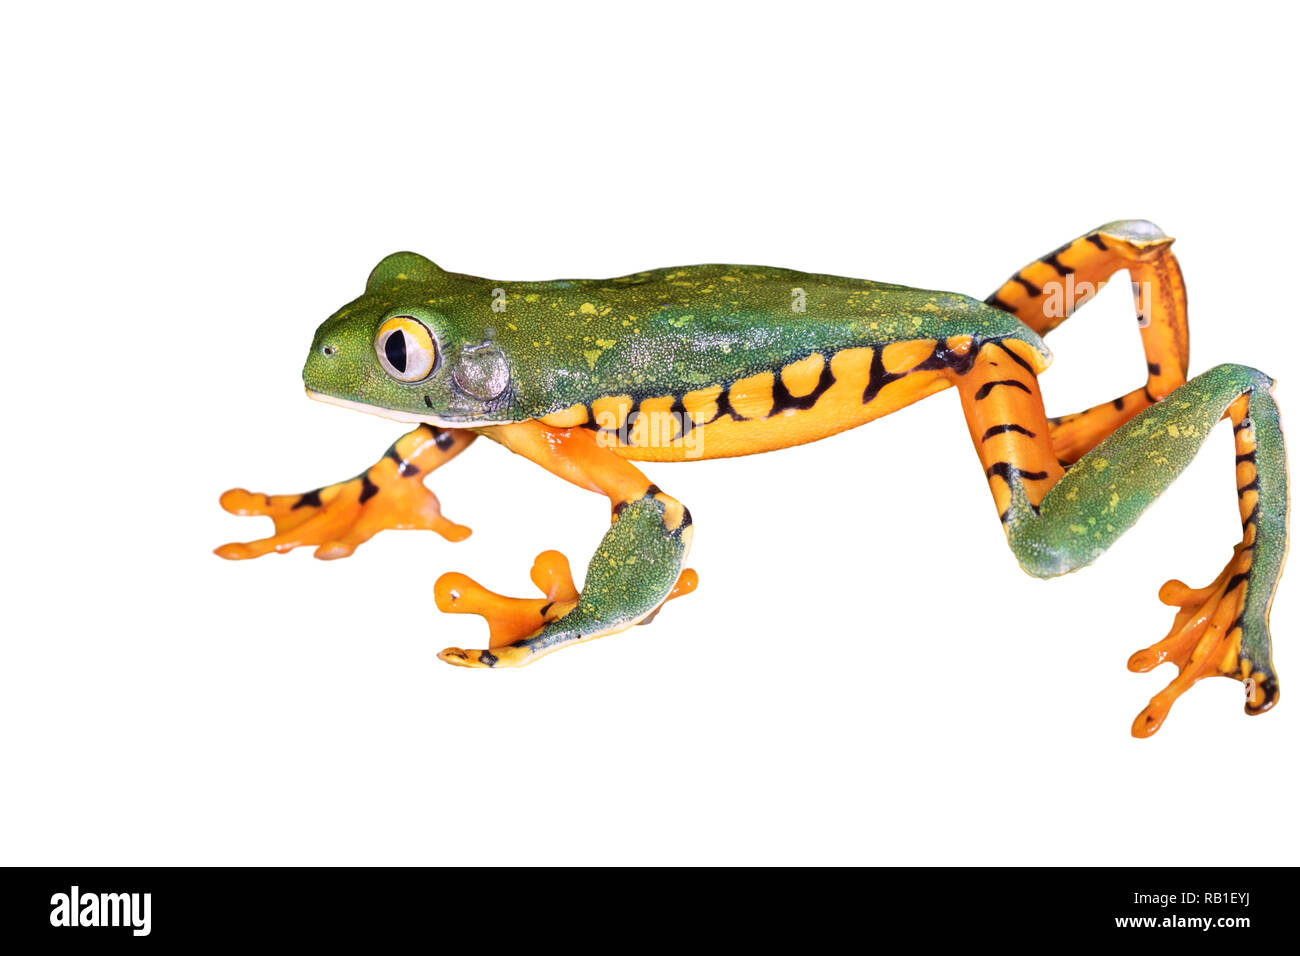 Splendid tree frog (Cruziohyla calcarifer) isolated on white background, clipping path attached. Stock Photo